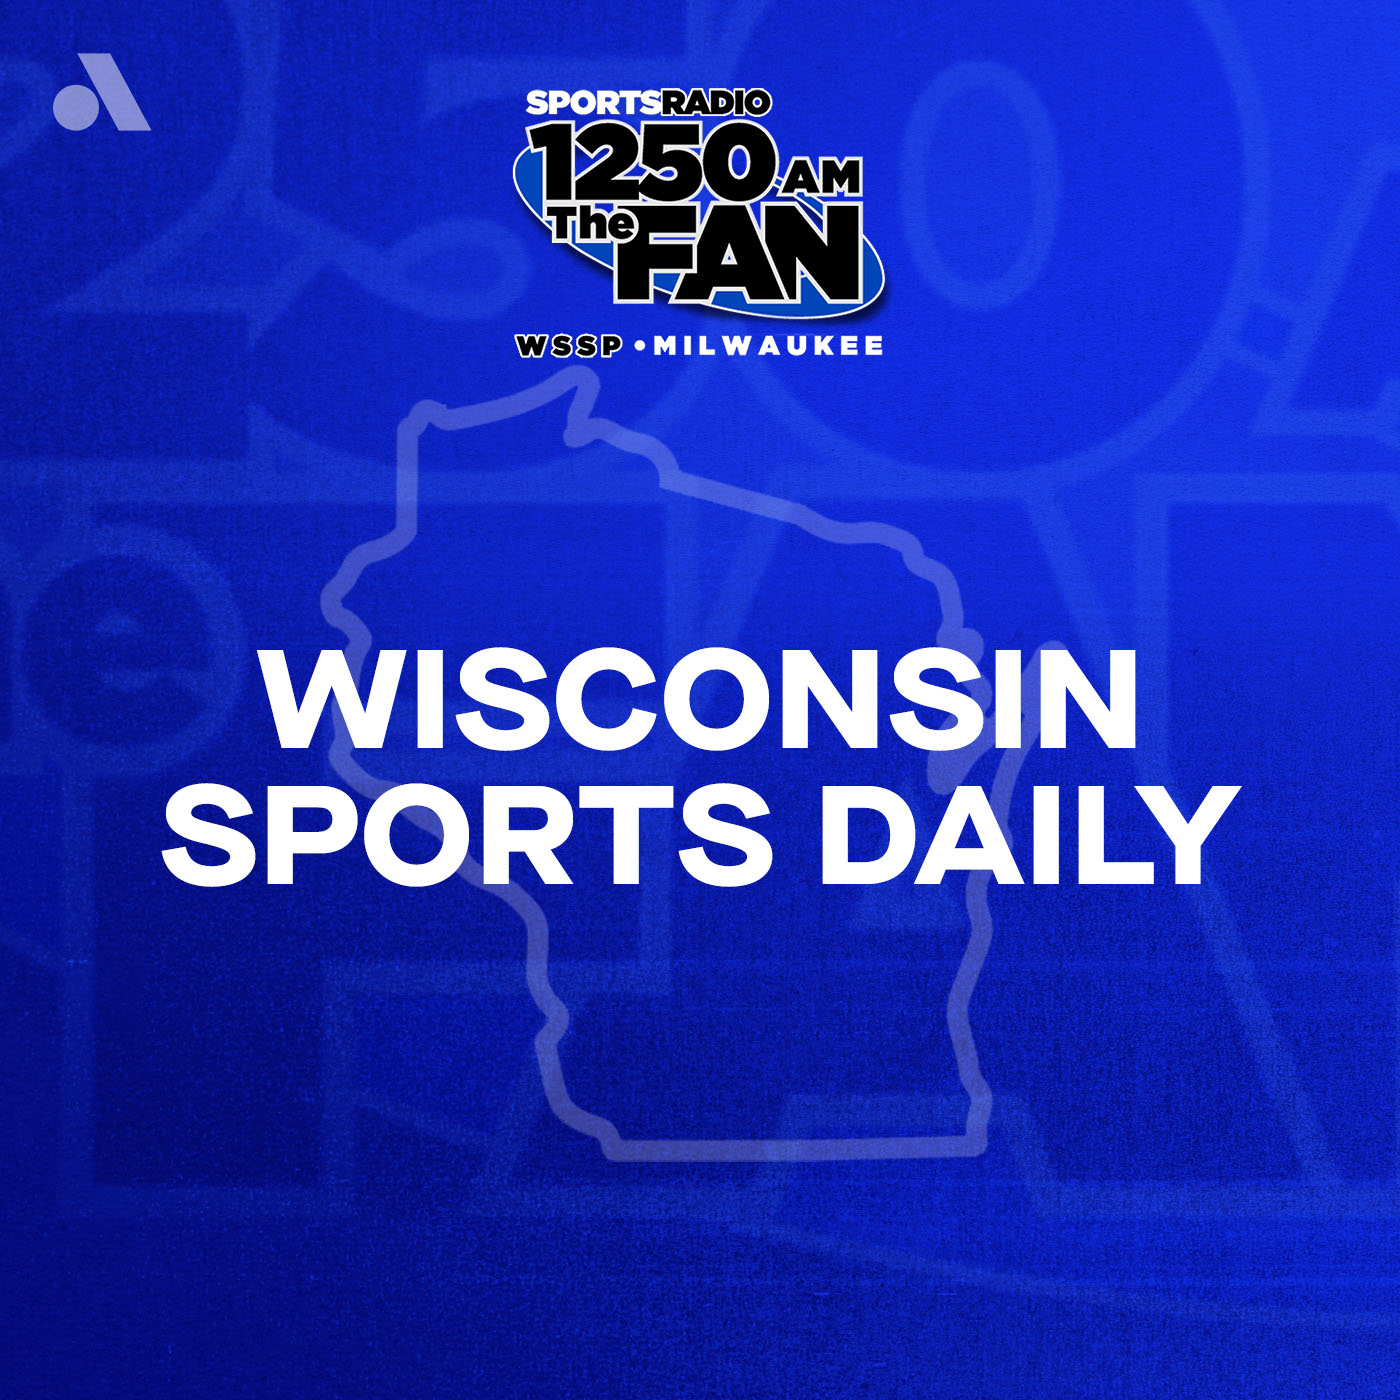 Monday, April 22nd: First Hour of Wisconsin Sports Daily- Huge Bucks Game 1 Win Changes the Perspective on the Series- Brewers Sweep the Cardinals Over the Weekend